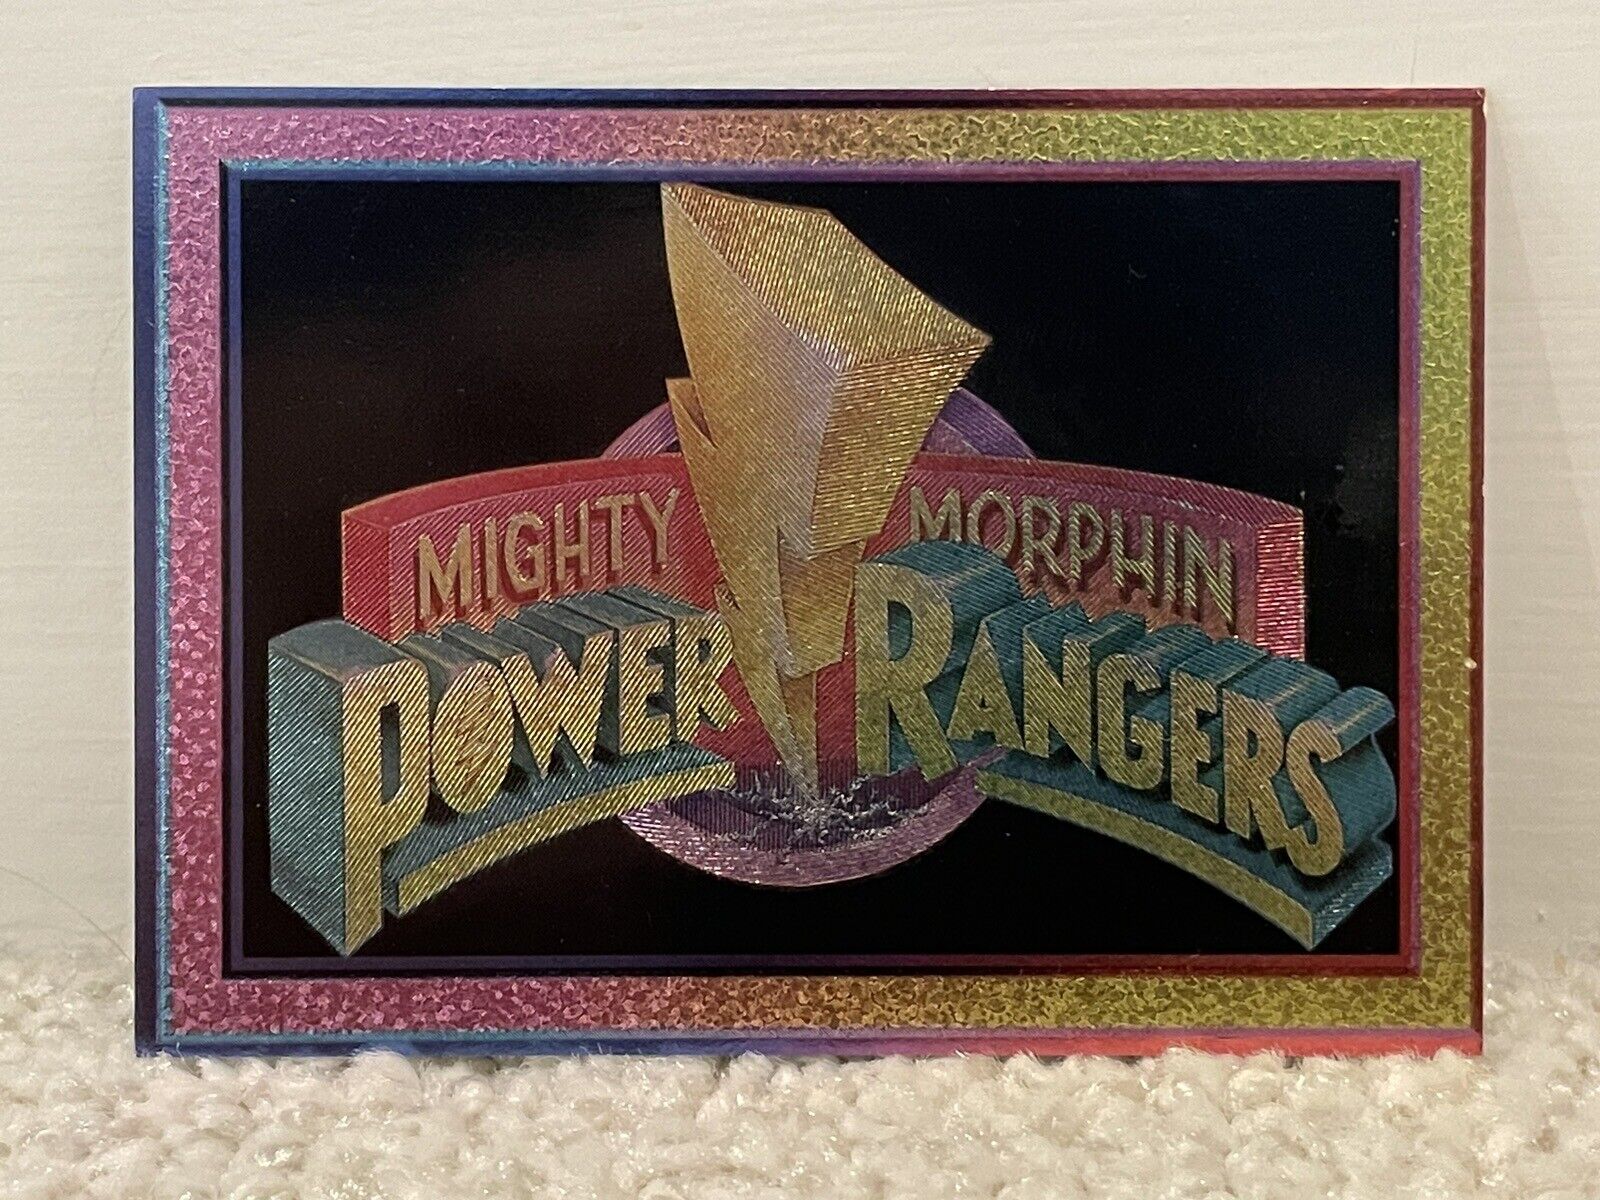 1994 MIGHTY MORPHING POWER RANGERS #1 COLLECT-A-CARD Power Foil Series 1